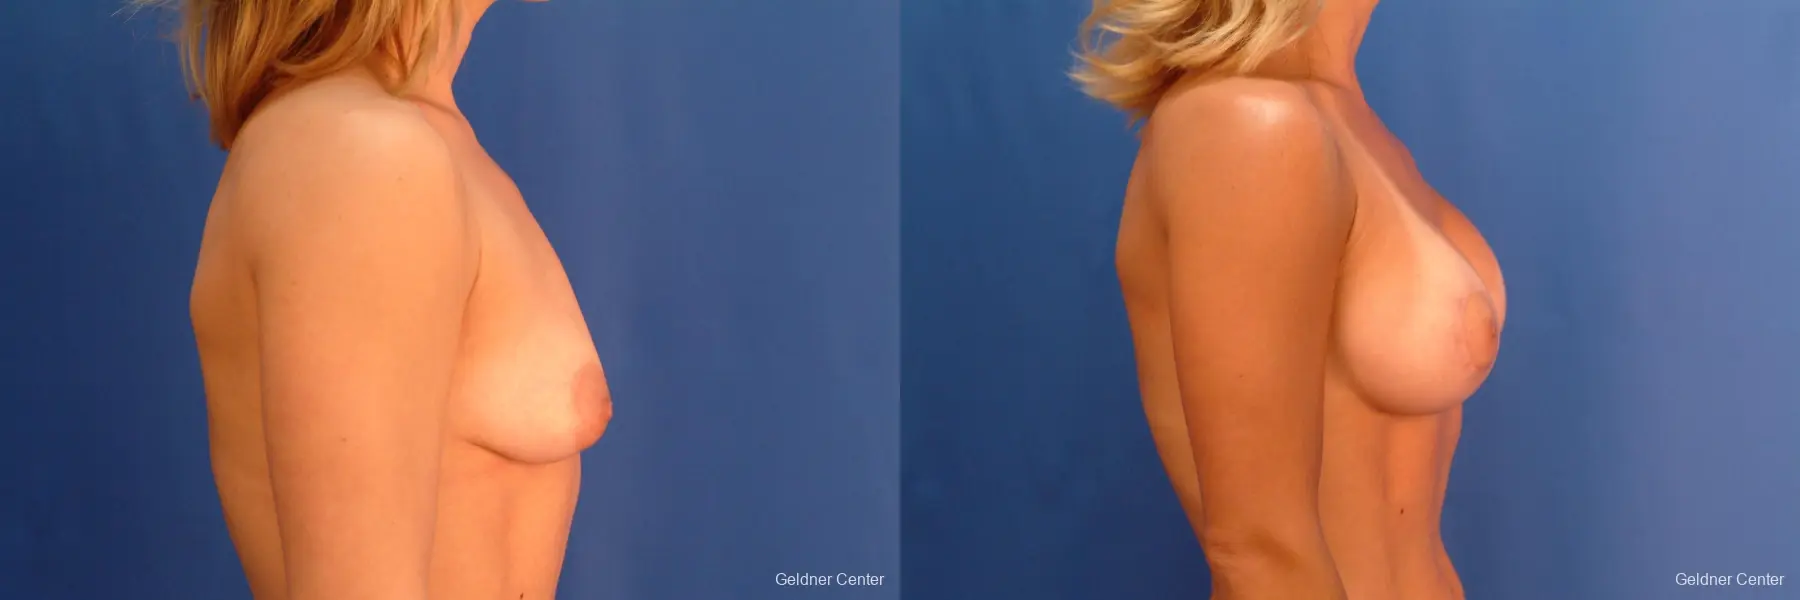 Breast Augmentation Lake Shore Dr, Chicago 2637 - Before and After 2